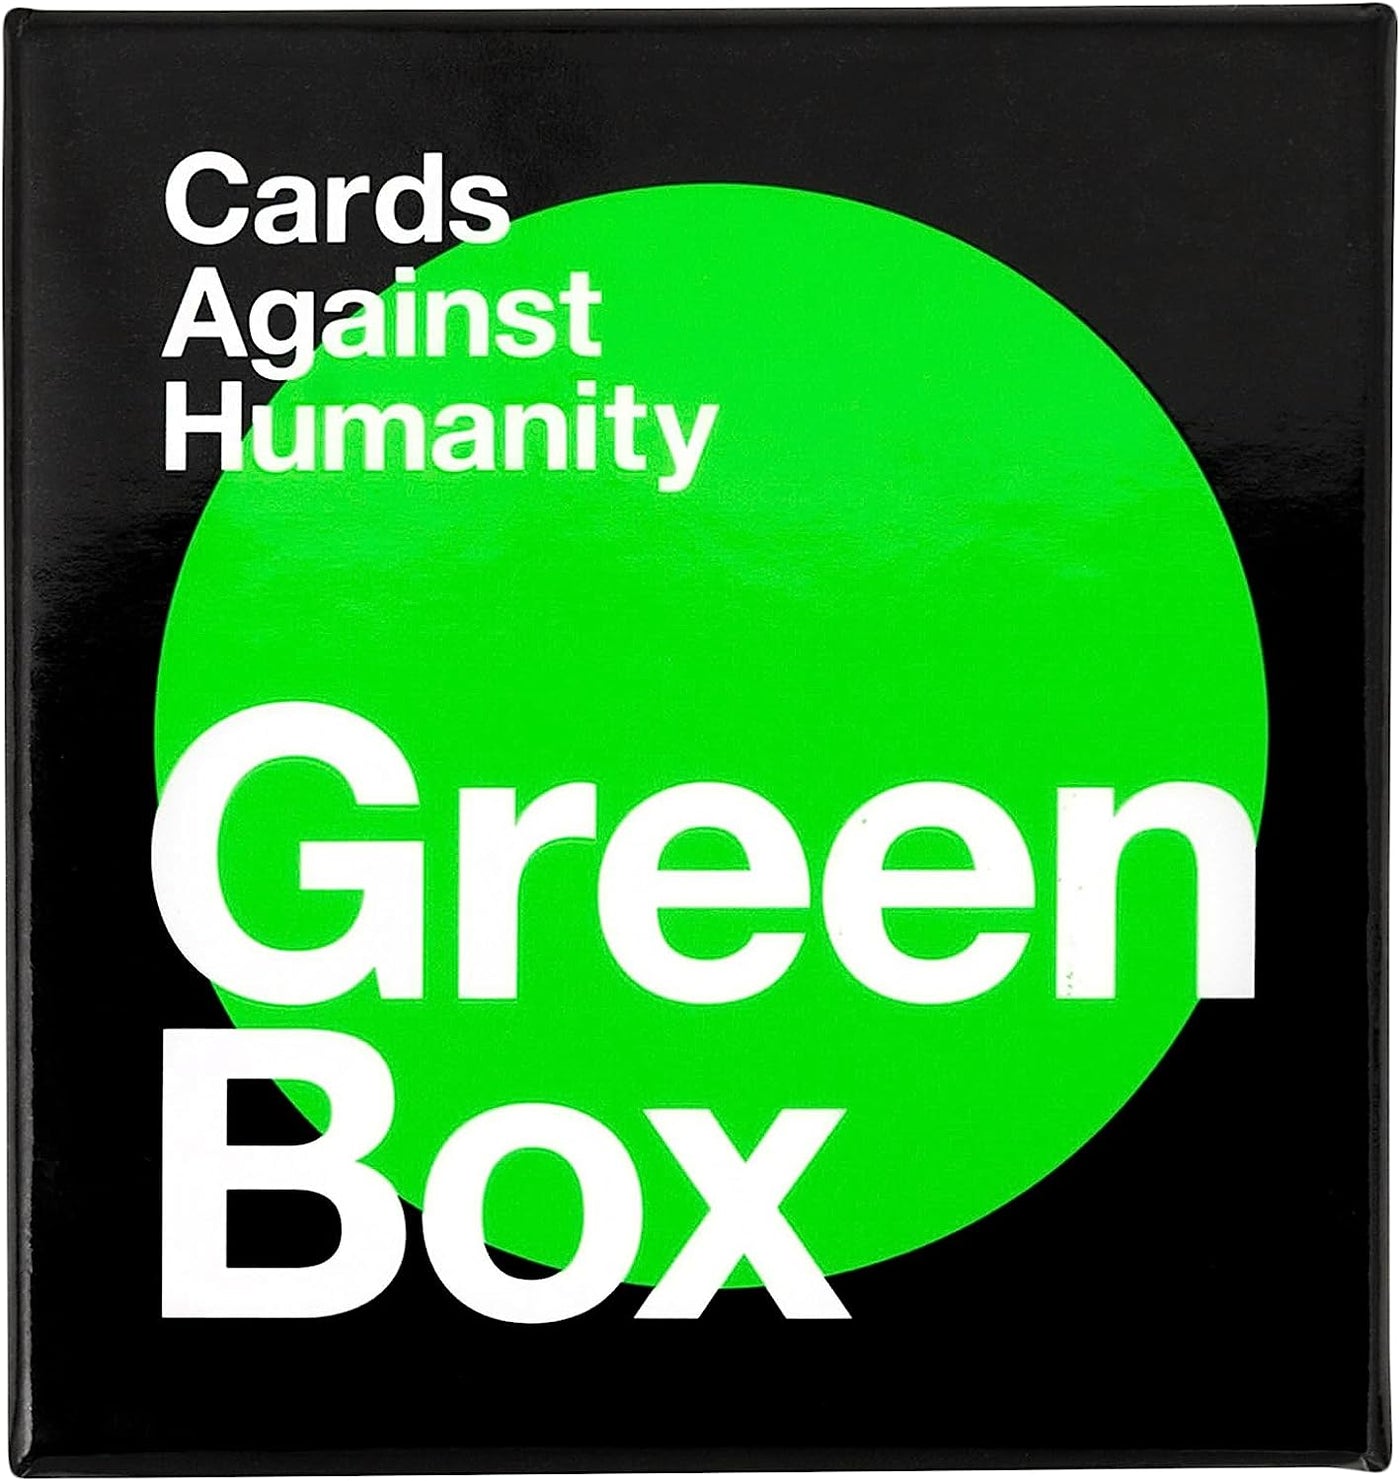 Cards Against Humanity Green Box